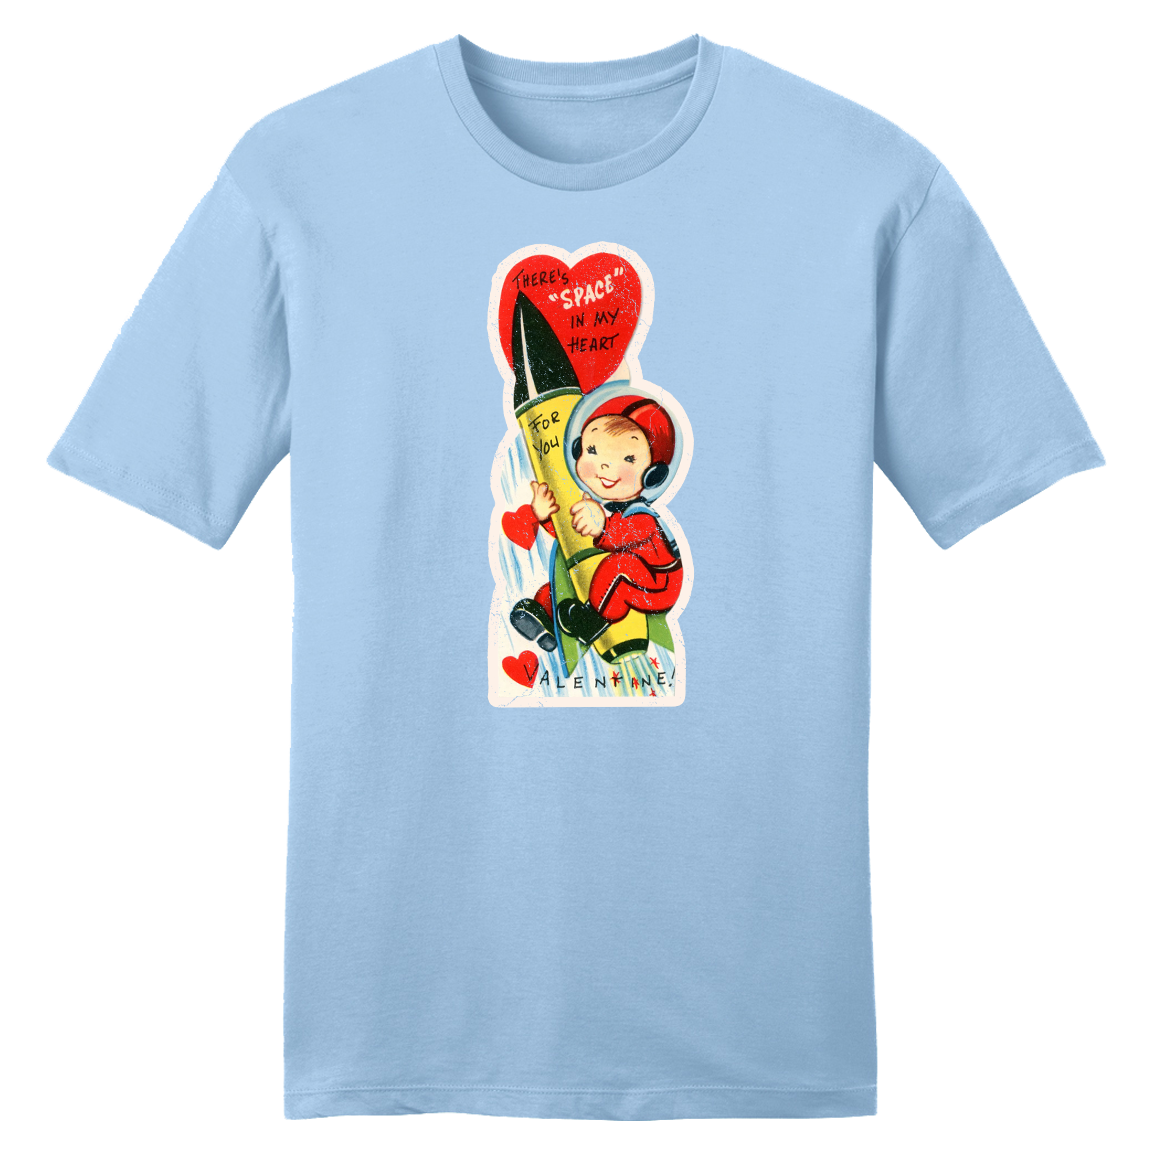 Space in My Heart - Vintage Valentine's Day Tee